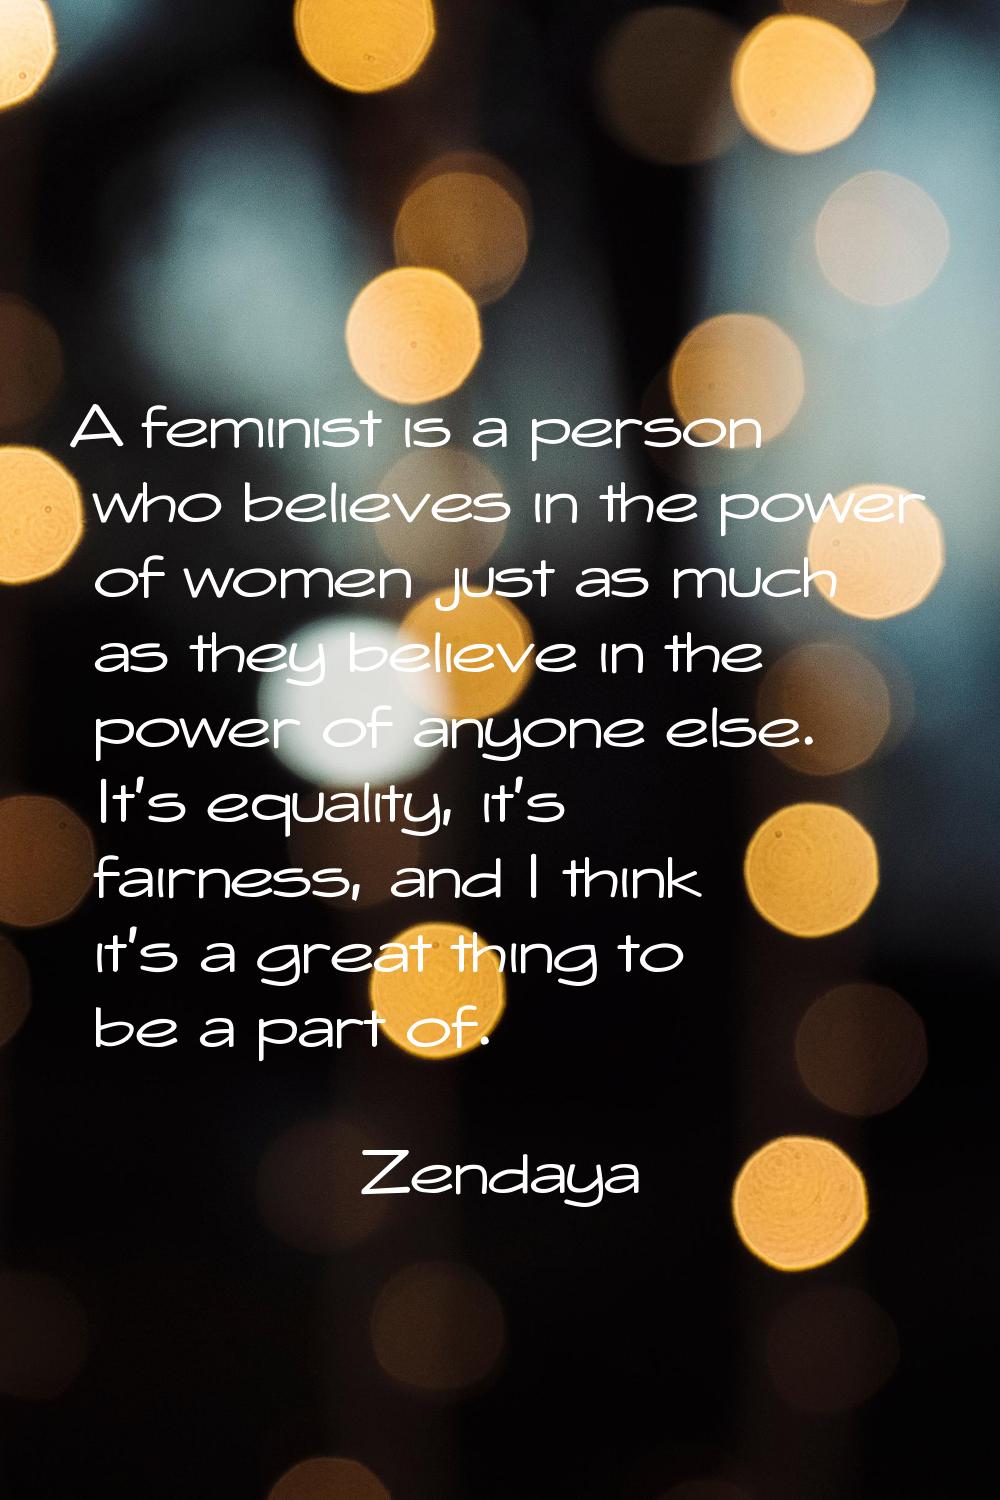 A feminist is a person who believes in the power of women just as much as they believe in the power